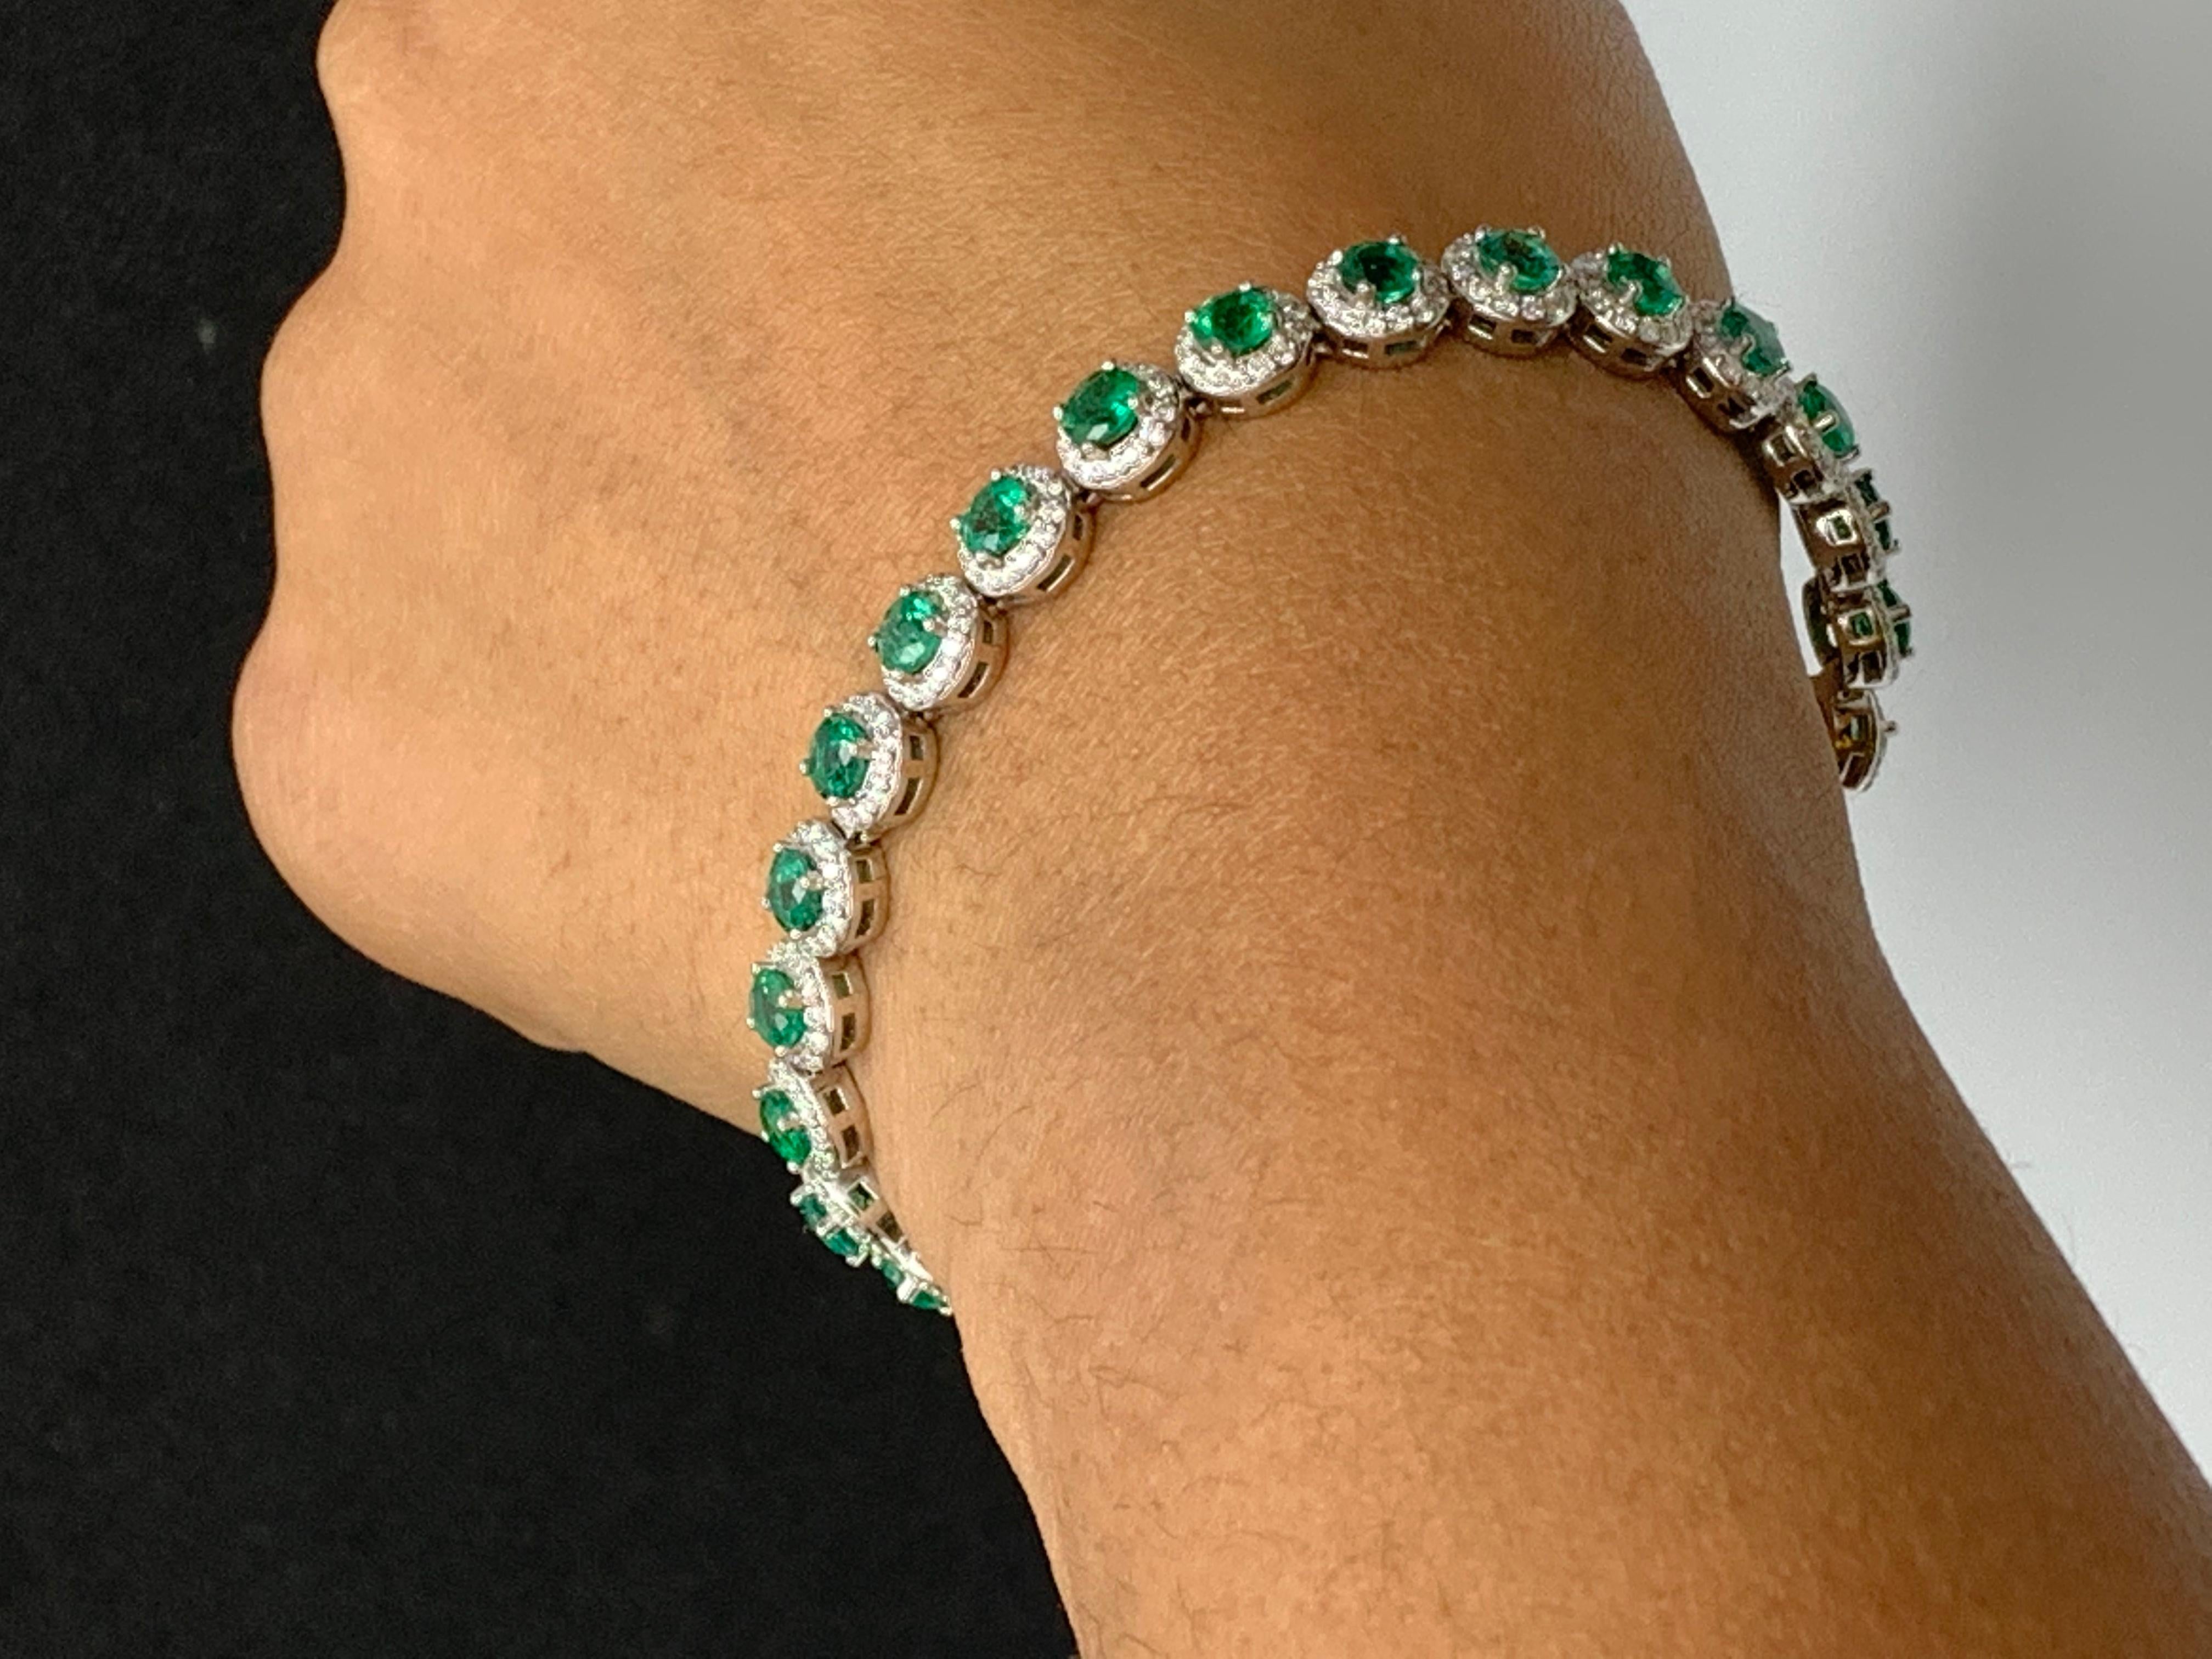 6.94 Carat Emerald and Diamond Halo Tennis Bracelet in 14k White Gold For Sale 9